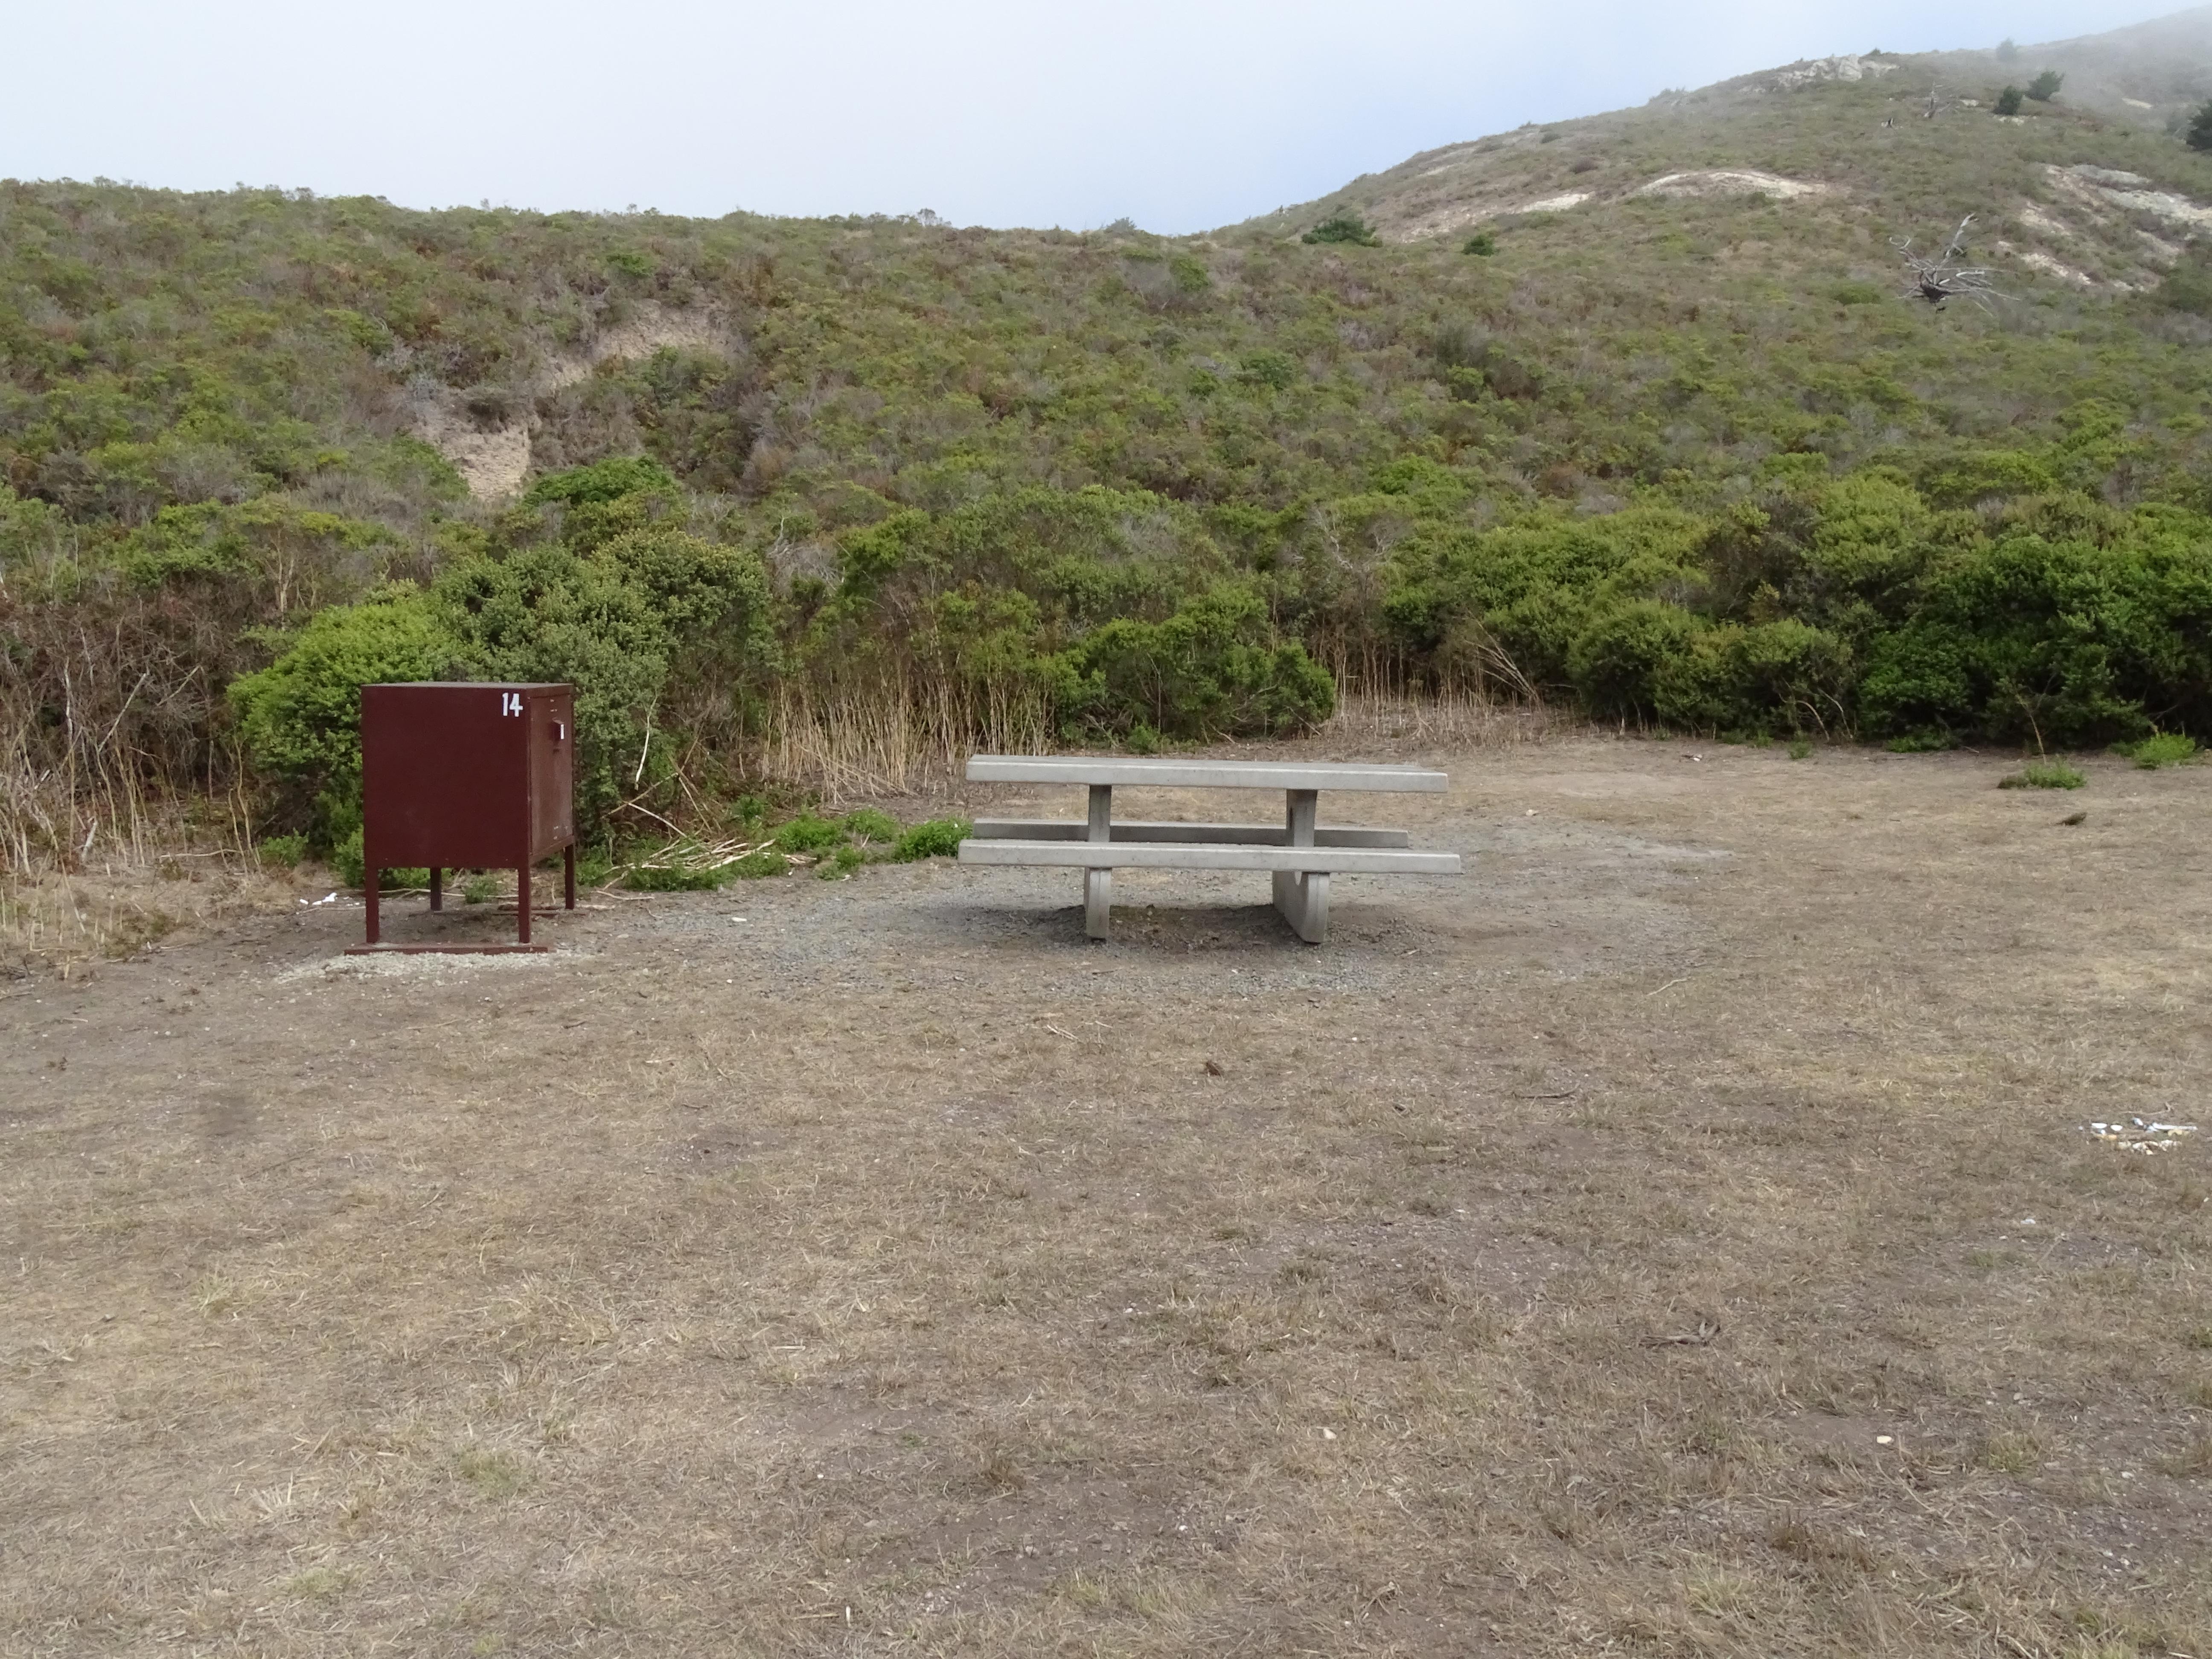 A campsite containing a picnic table and a food storage locker in front of a shrub-covered hill.